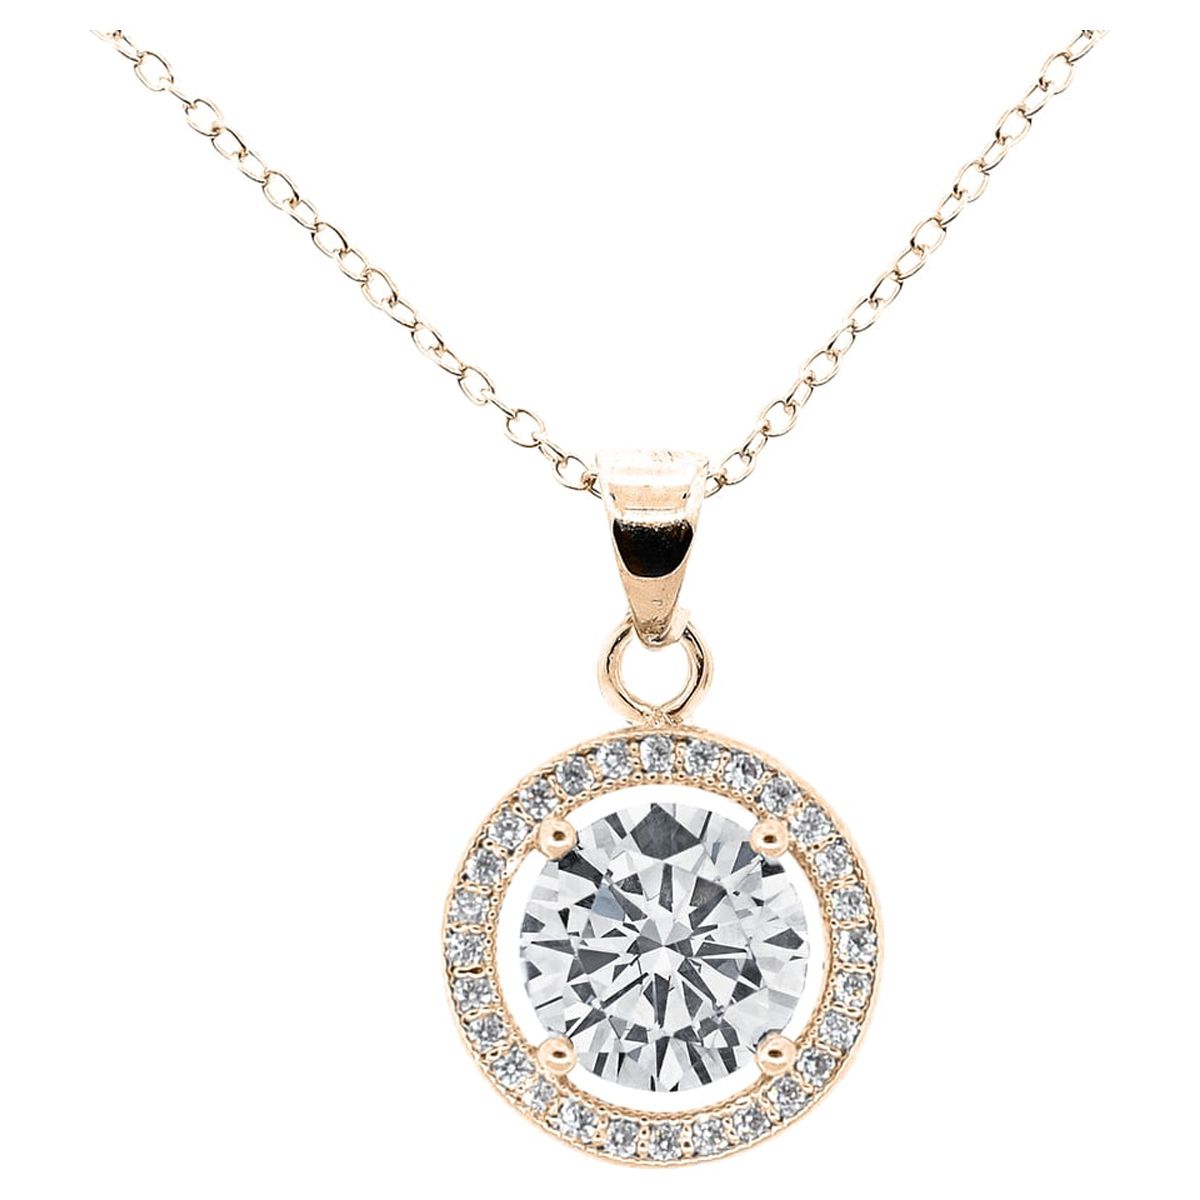 Cate & Chloe Blake 18k Rose Gold Plated Halo Necklace for Women | CZ Crystal Necklace, Jewelry Gift for Her - image 1 of 9